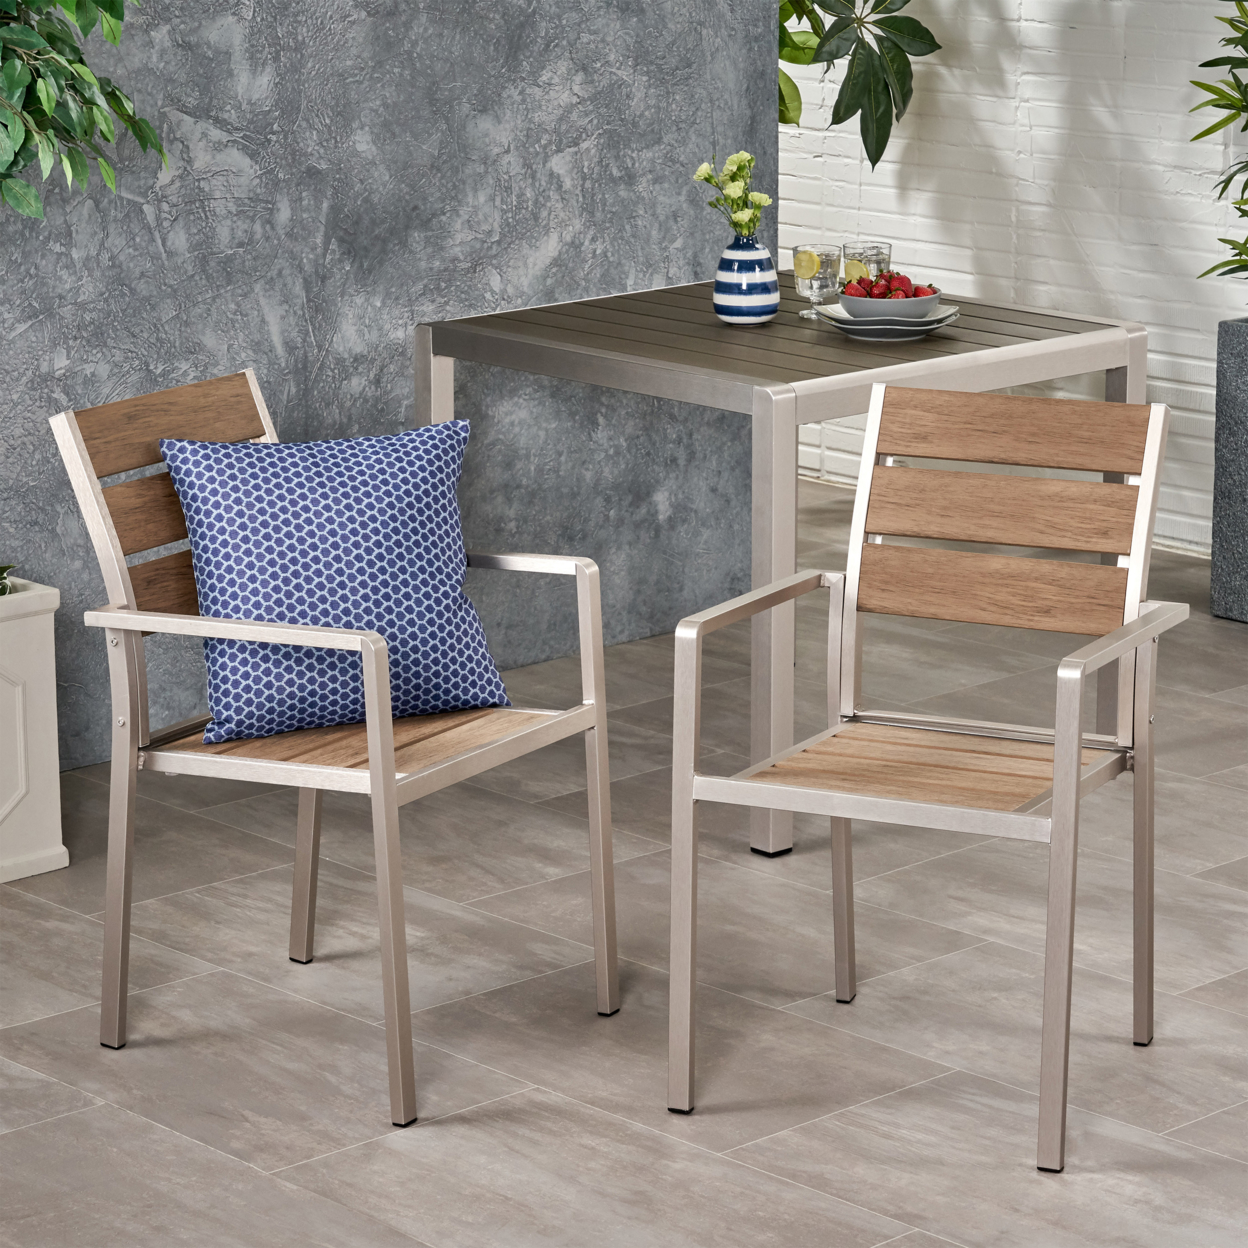 Belle Outdoor Modern Aluminum Dining Chair With Faux Wood Seat (Set Of 2) - Natural Finish + Silver